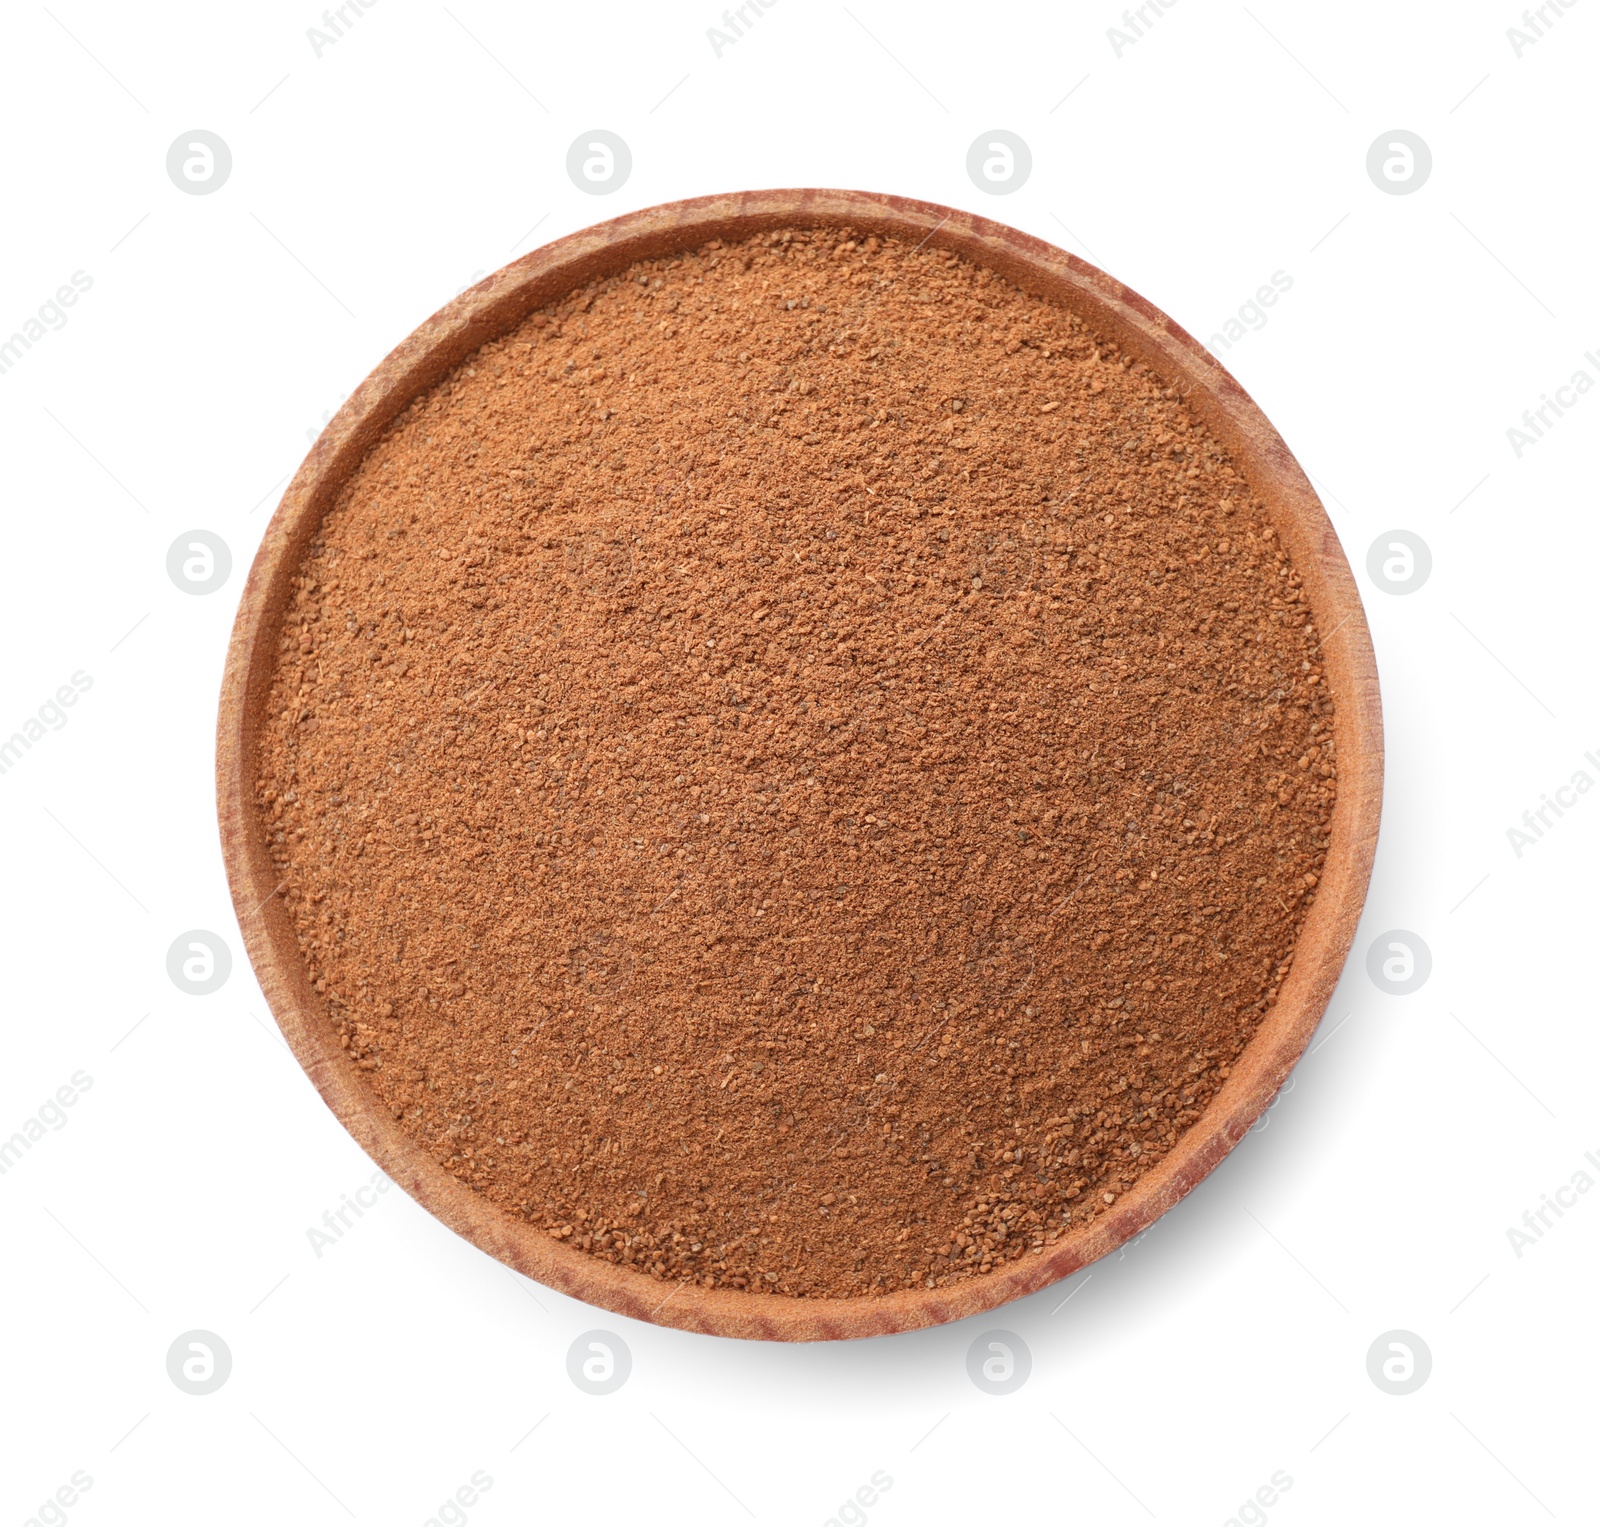 Photo of Wooden bowl with aromatic cinnamon powder isolated on white